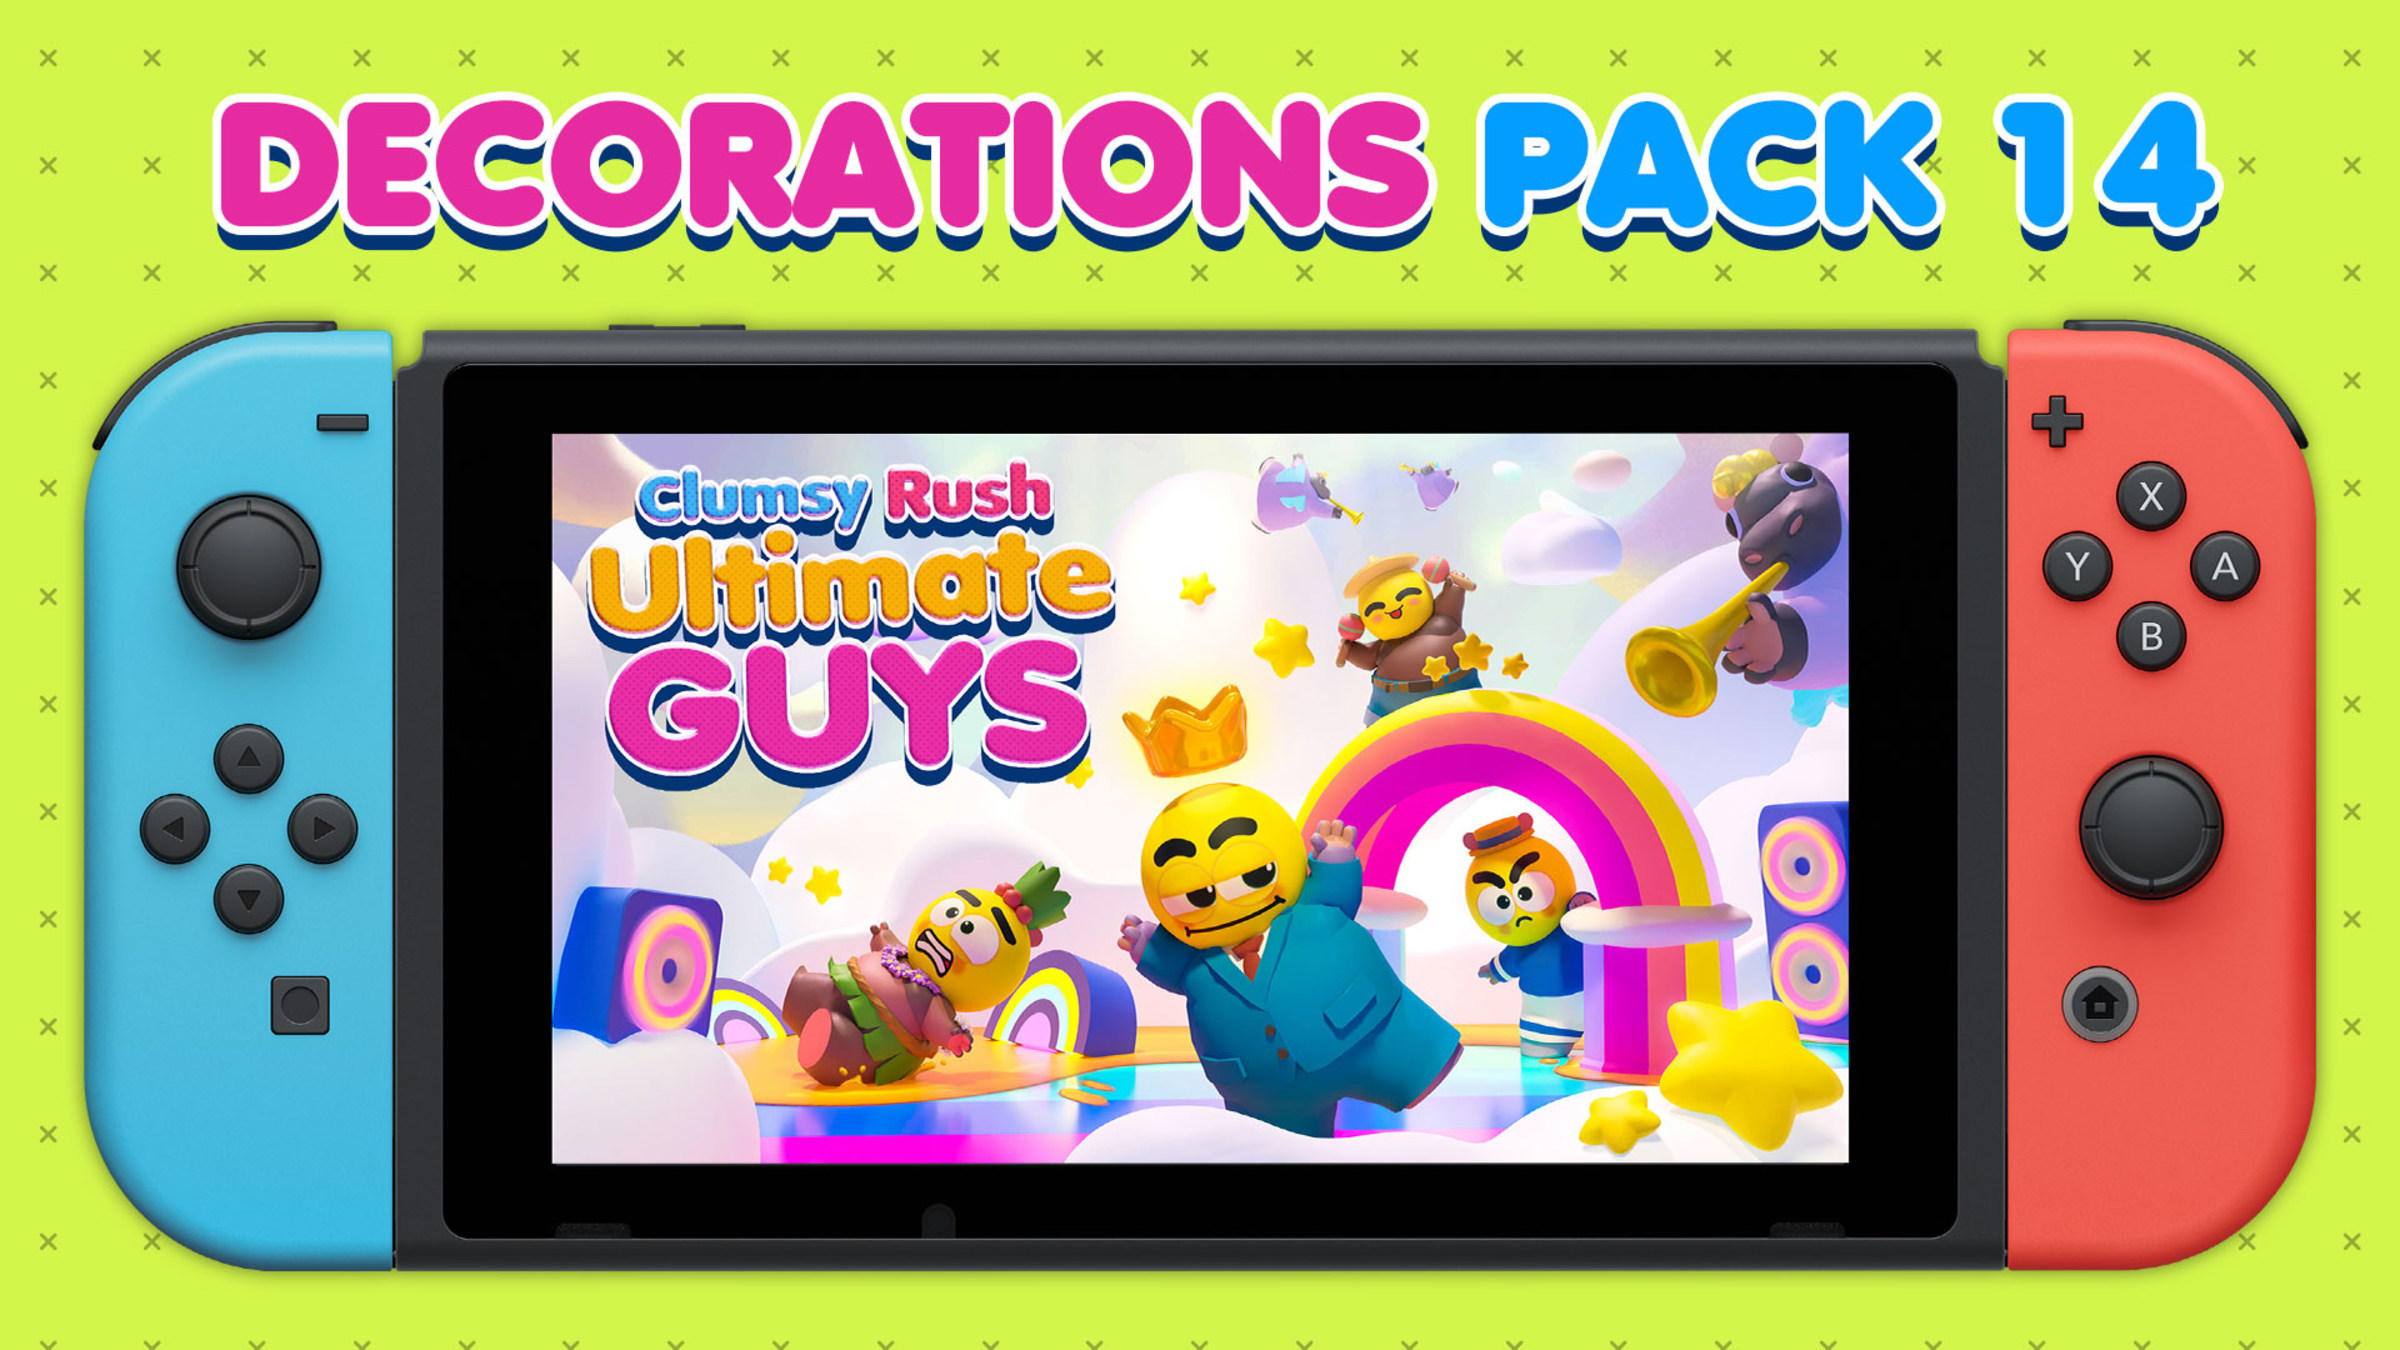 Decorations Pack 14 for Nintendo Switch - Nintendo Official Site